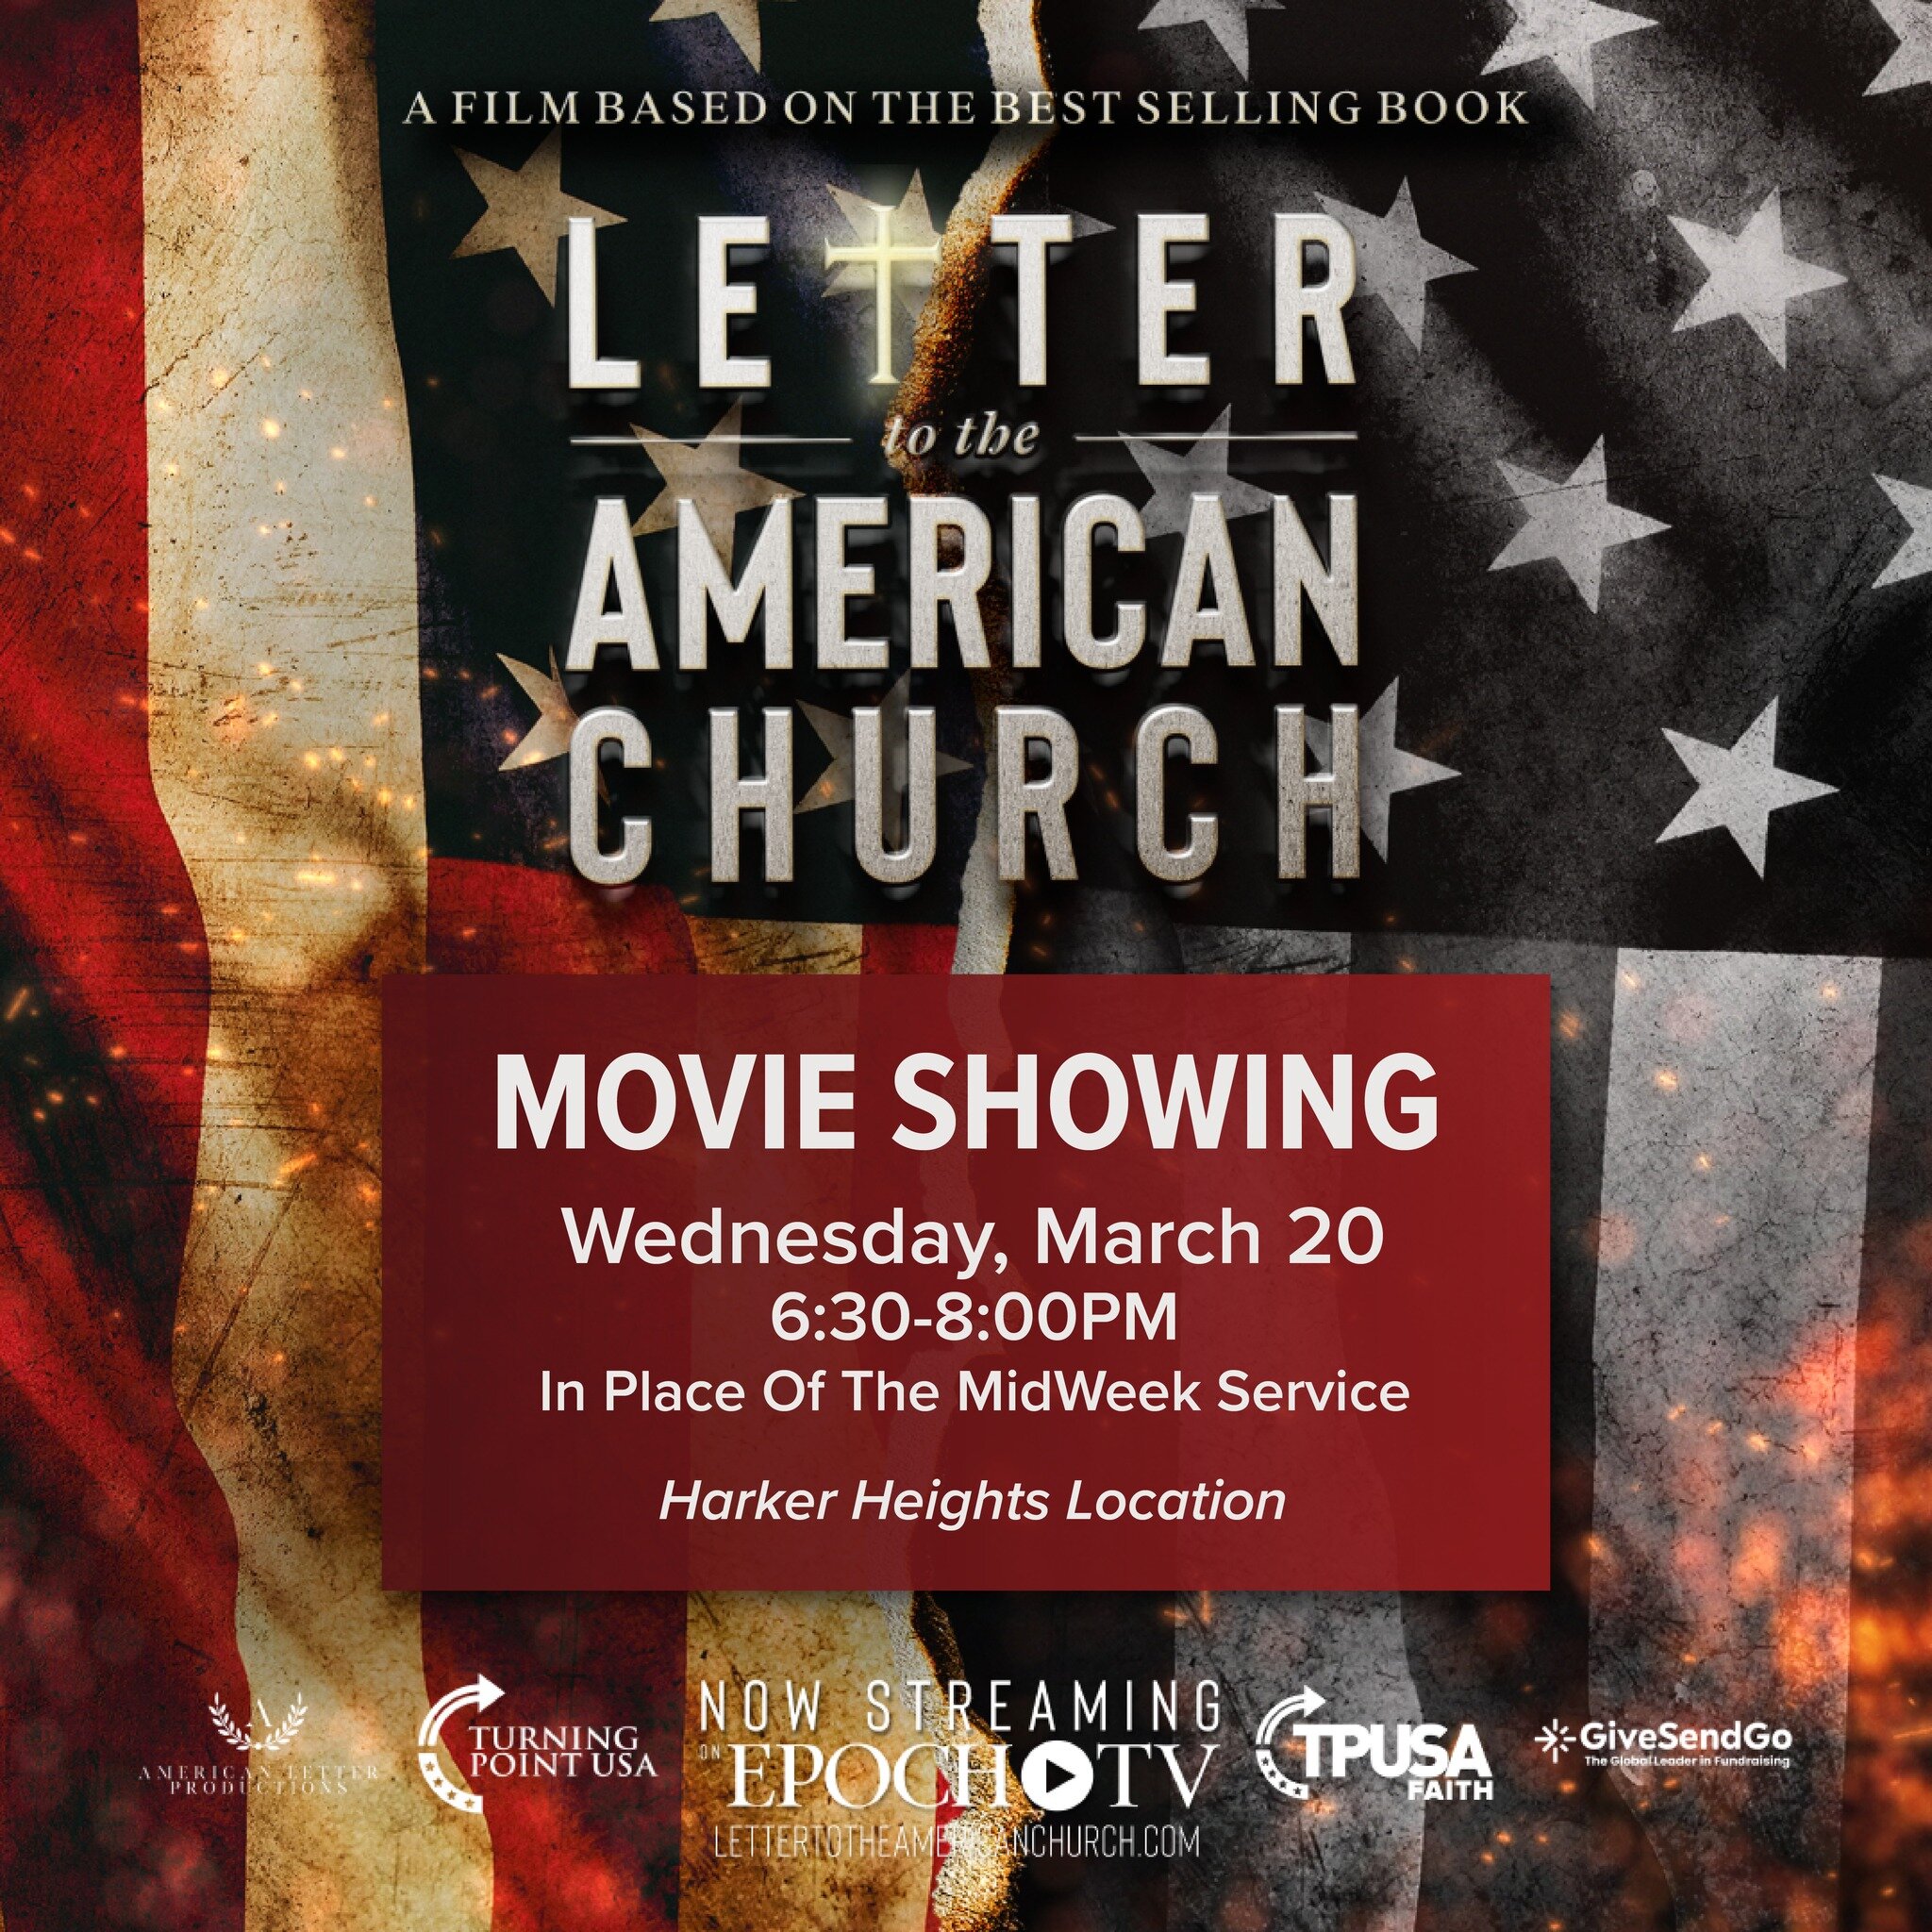 In place of MidWeek service tonight, we will be hosting a showing of &quot;Letter to the American Church&quot; from 6:30-8:00PM. Invite a friend, and head to vintage.church/events-hh to register!